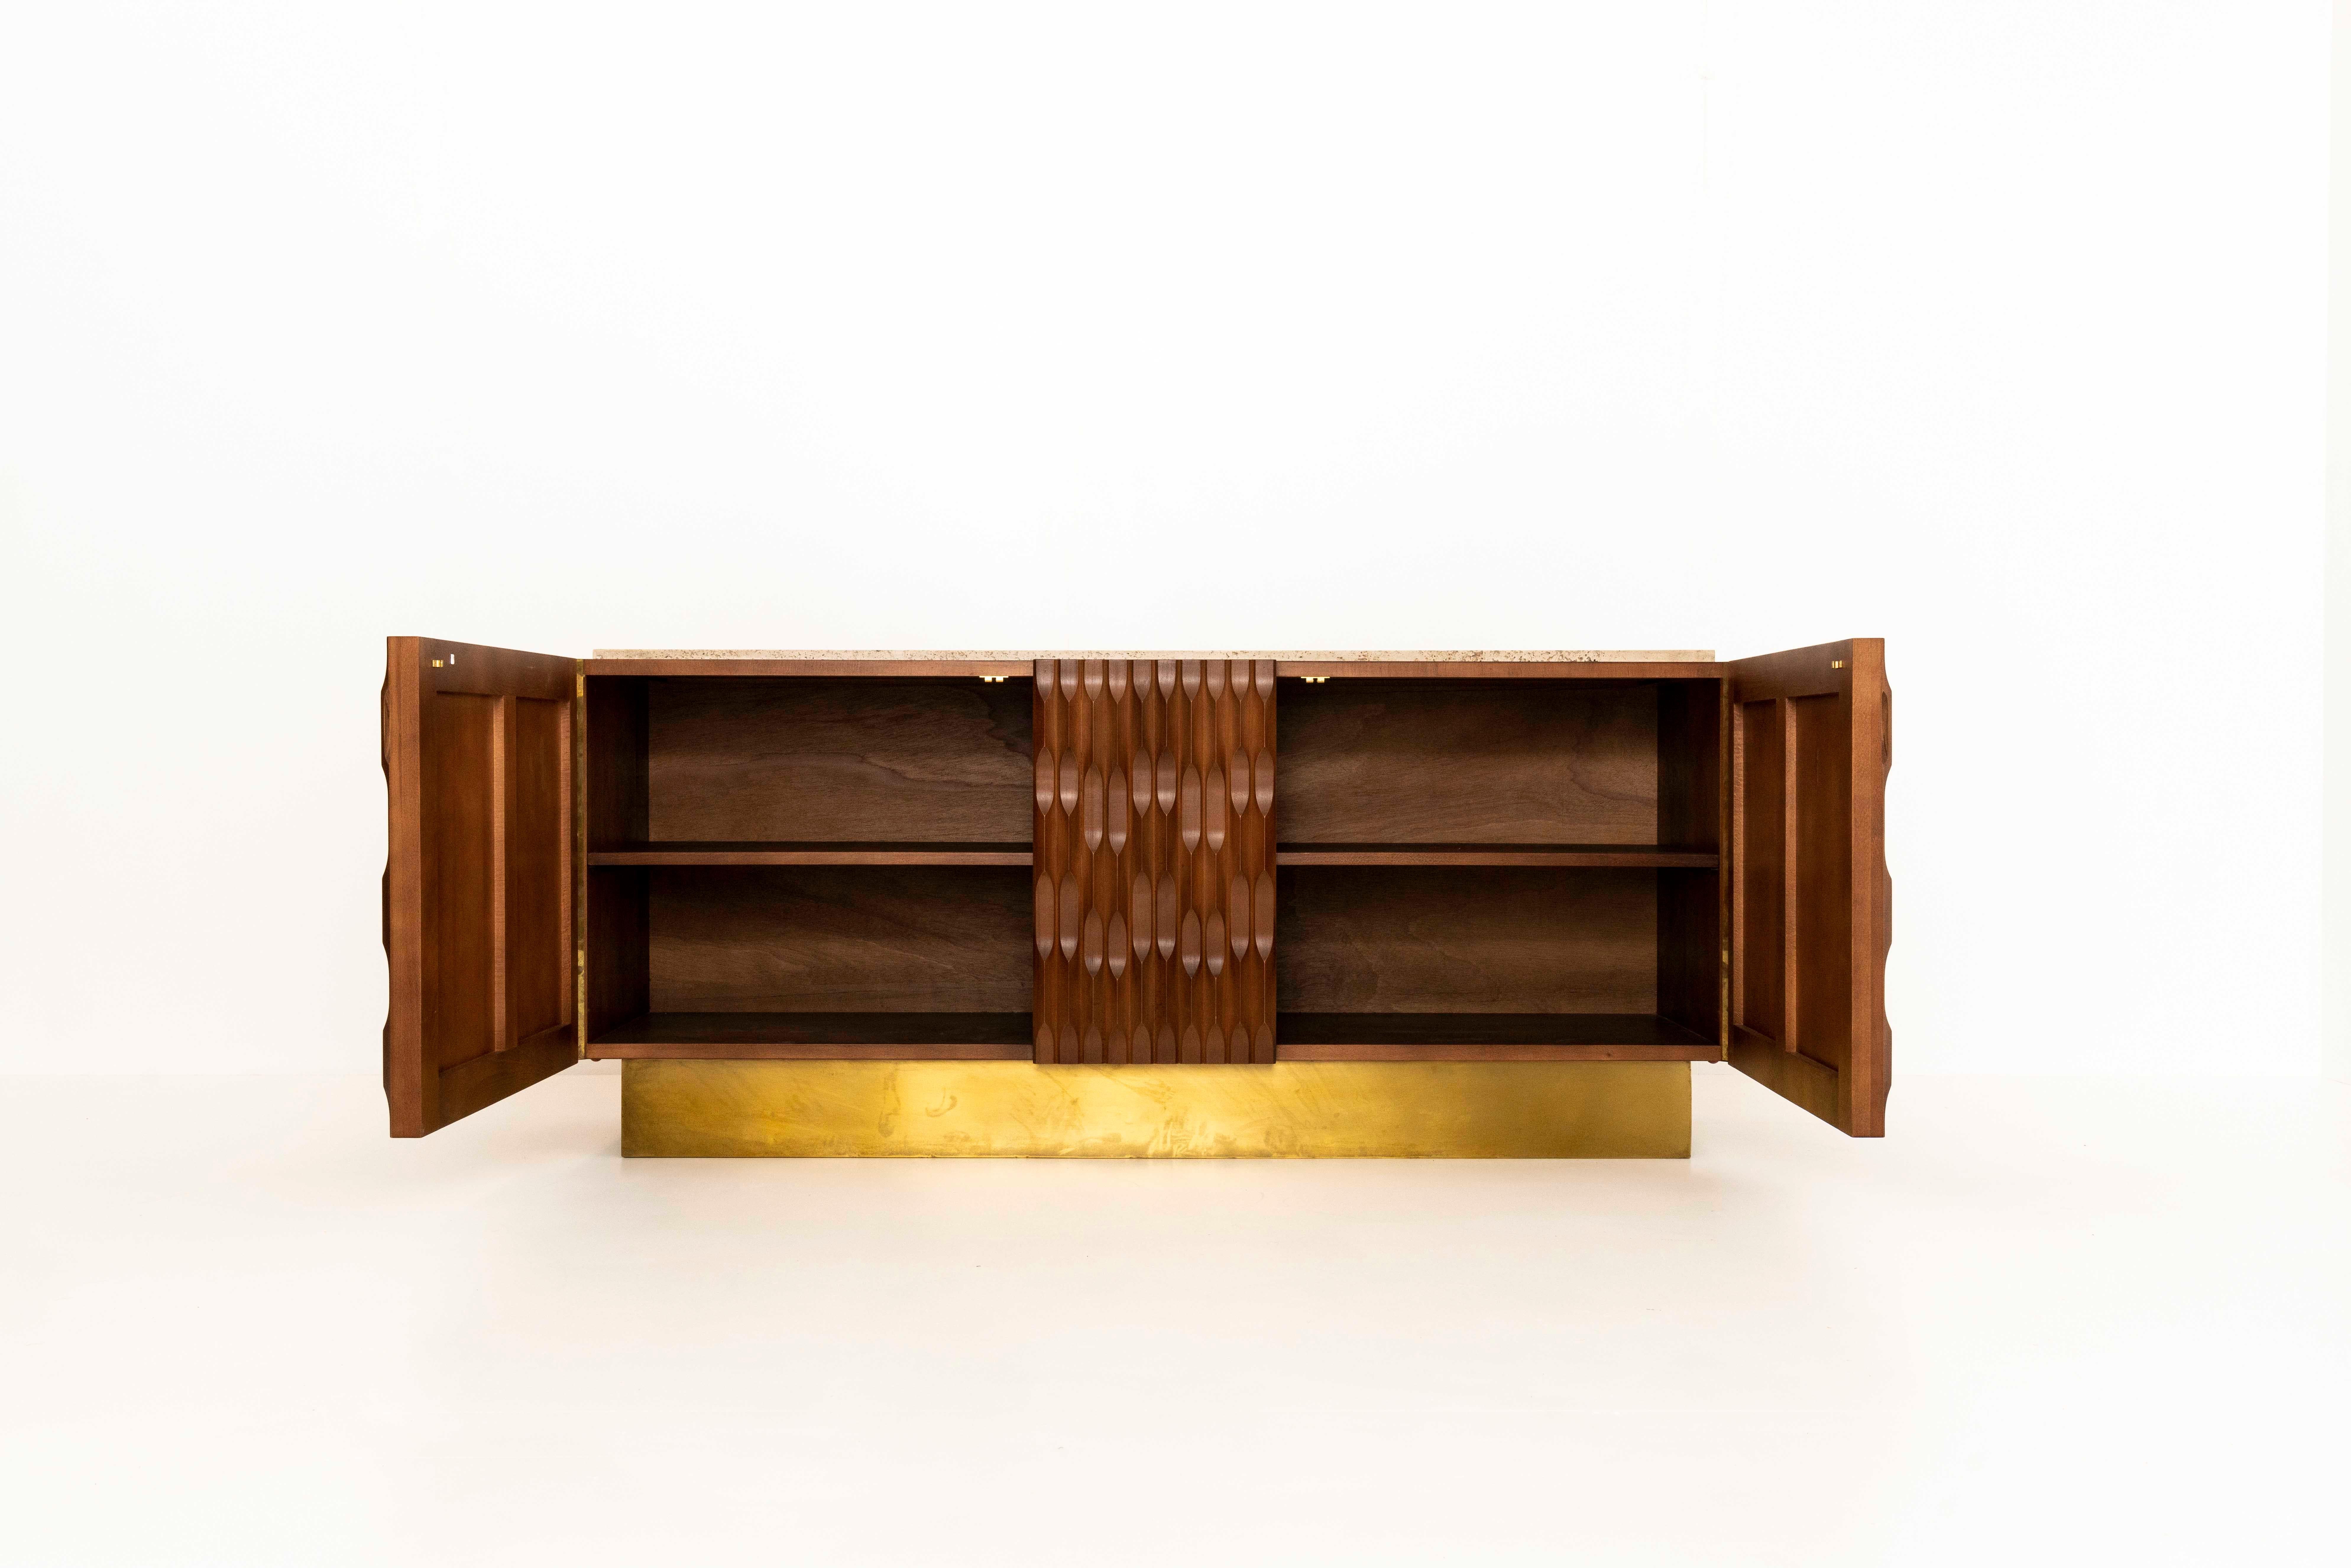 Late 20th Century Italian Brutalist Sideboard with Wood, Brass and Travertine, 1970s For Sale